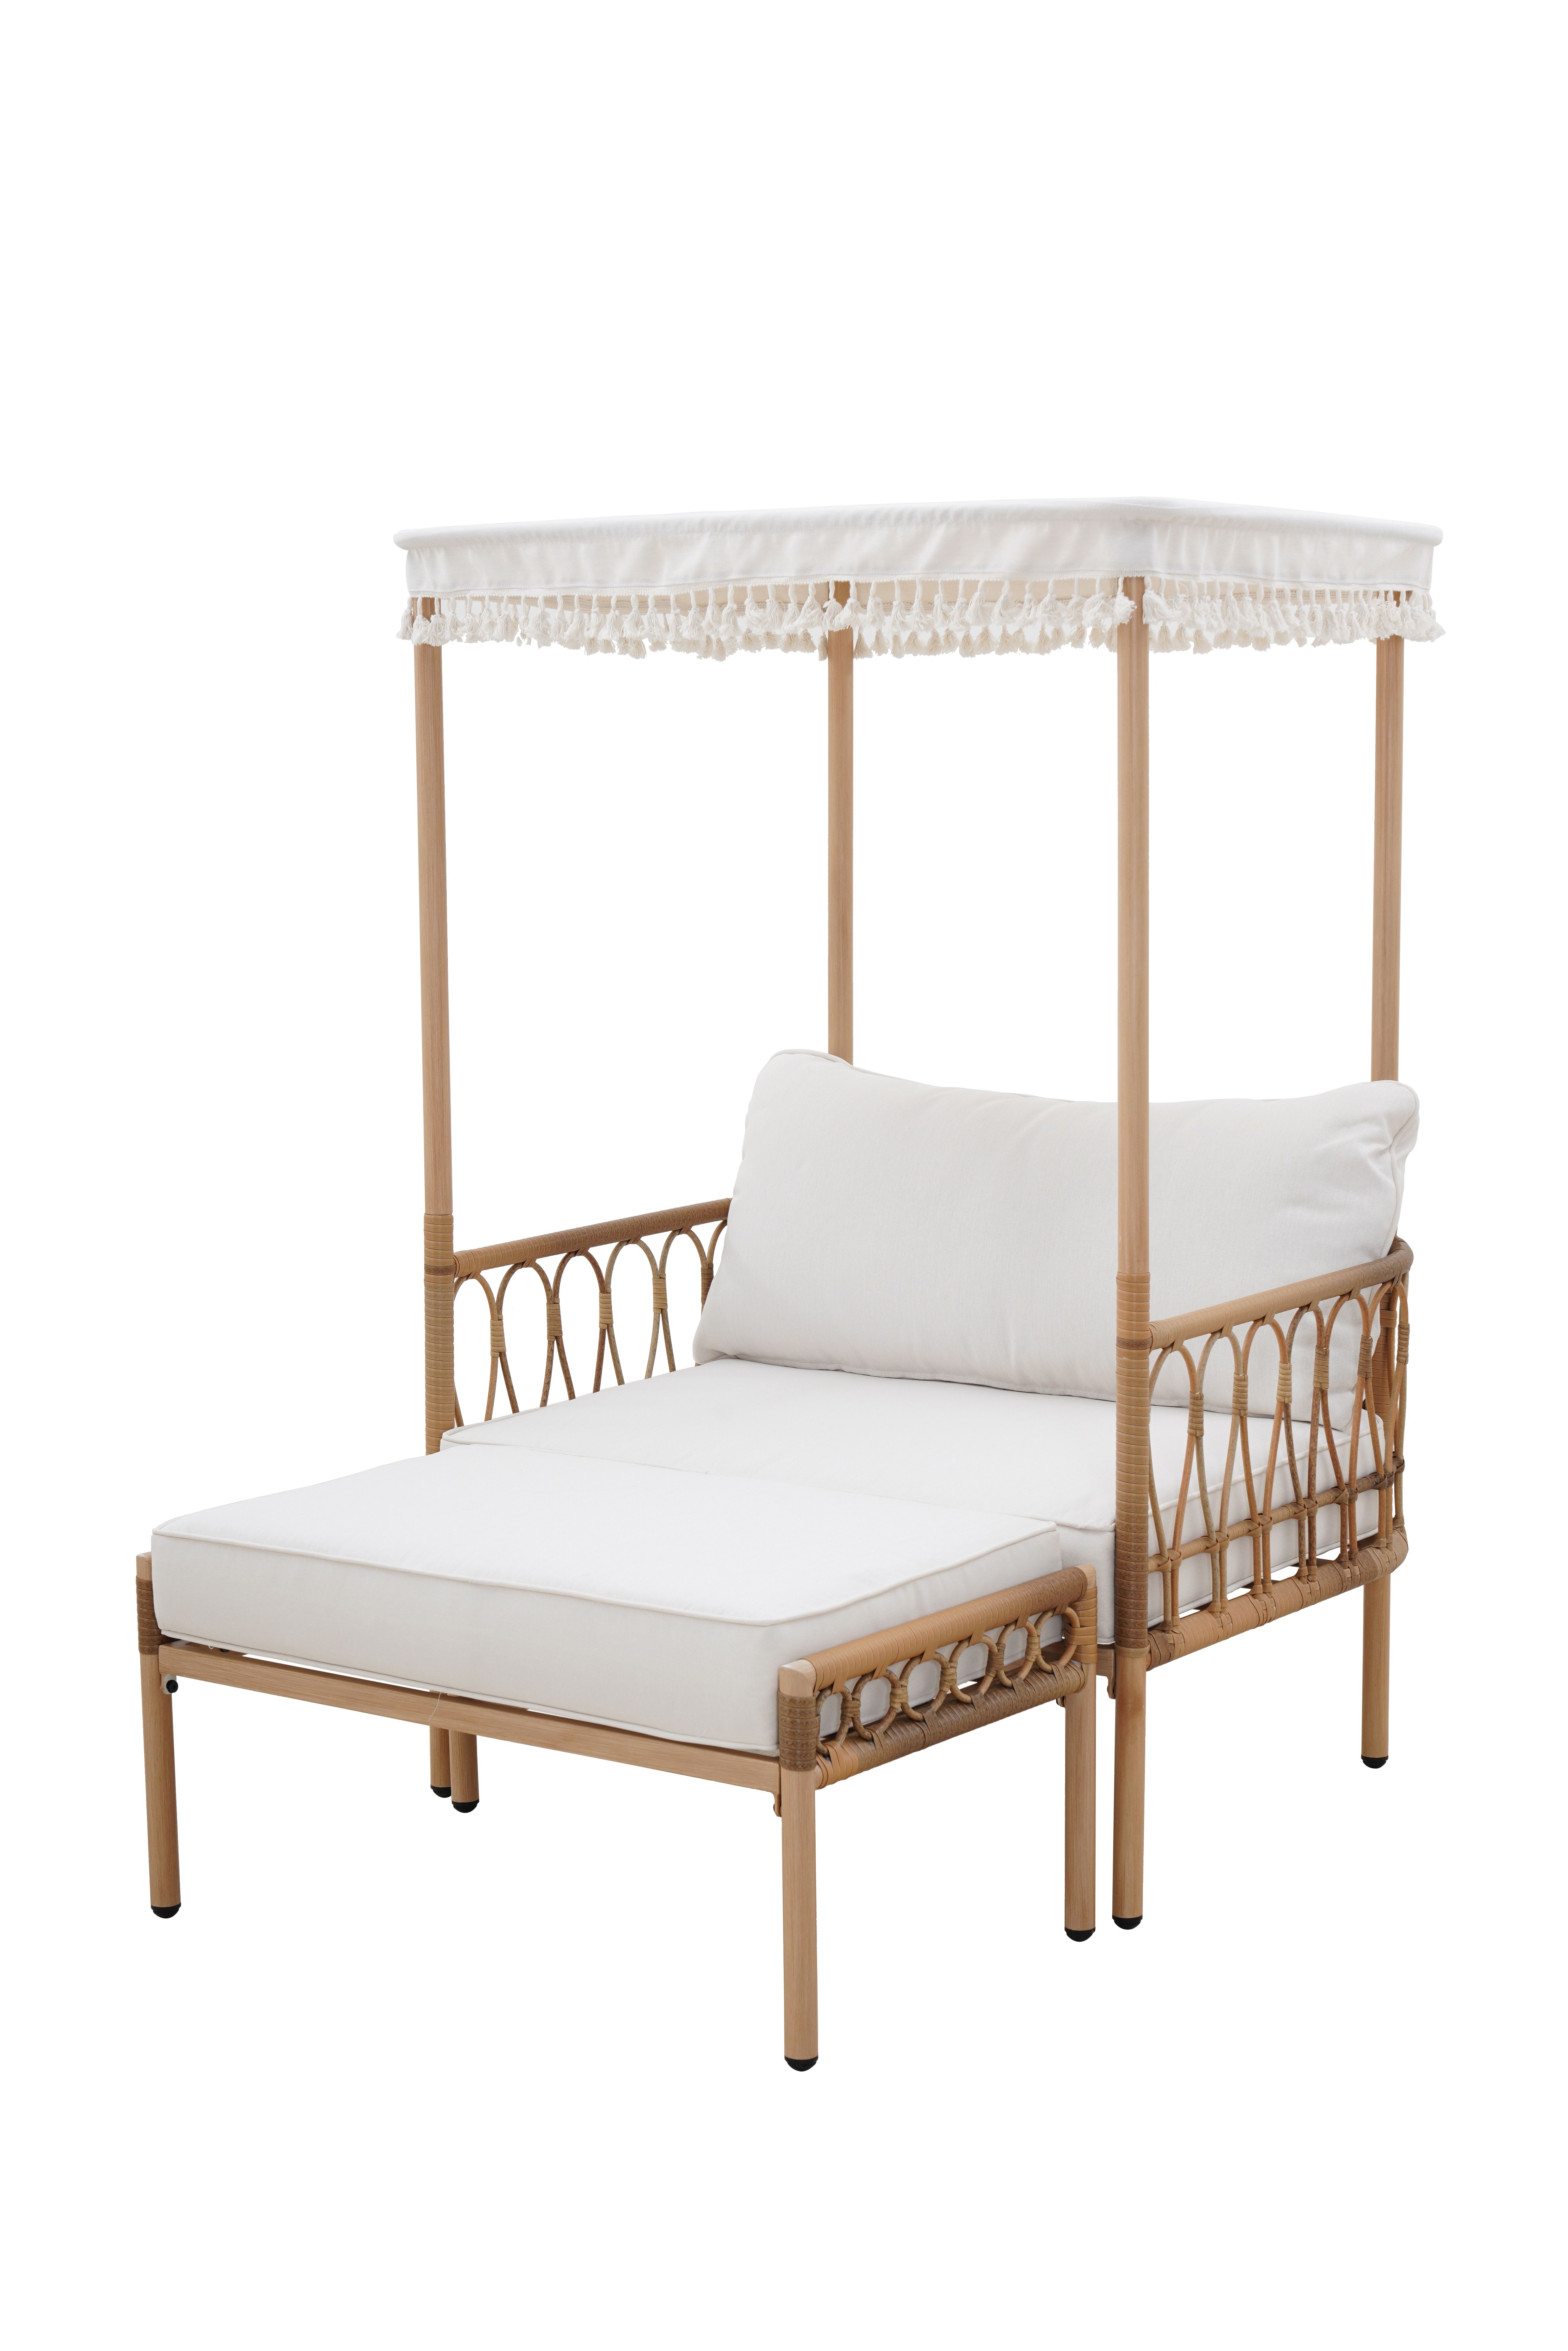 Better Homes & Gardens Willow Sage 2 Piece All-Weather Wicker Outdoor Canopy Chair and Ottoman Set, Beige - image 5 of 7